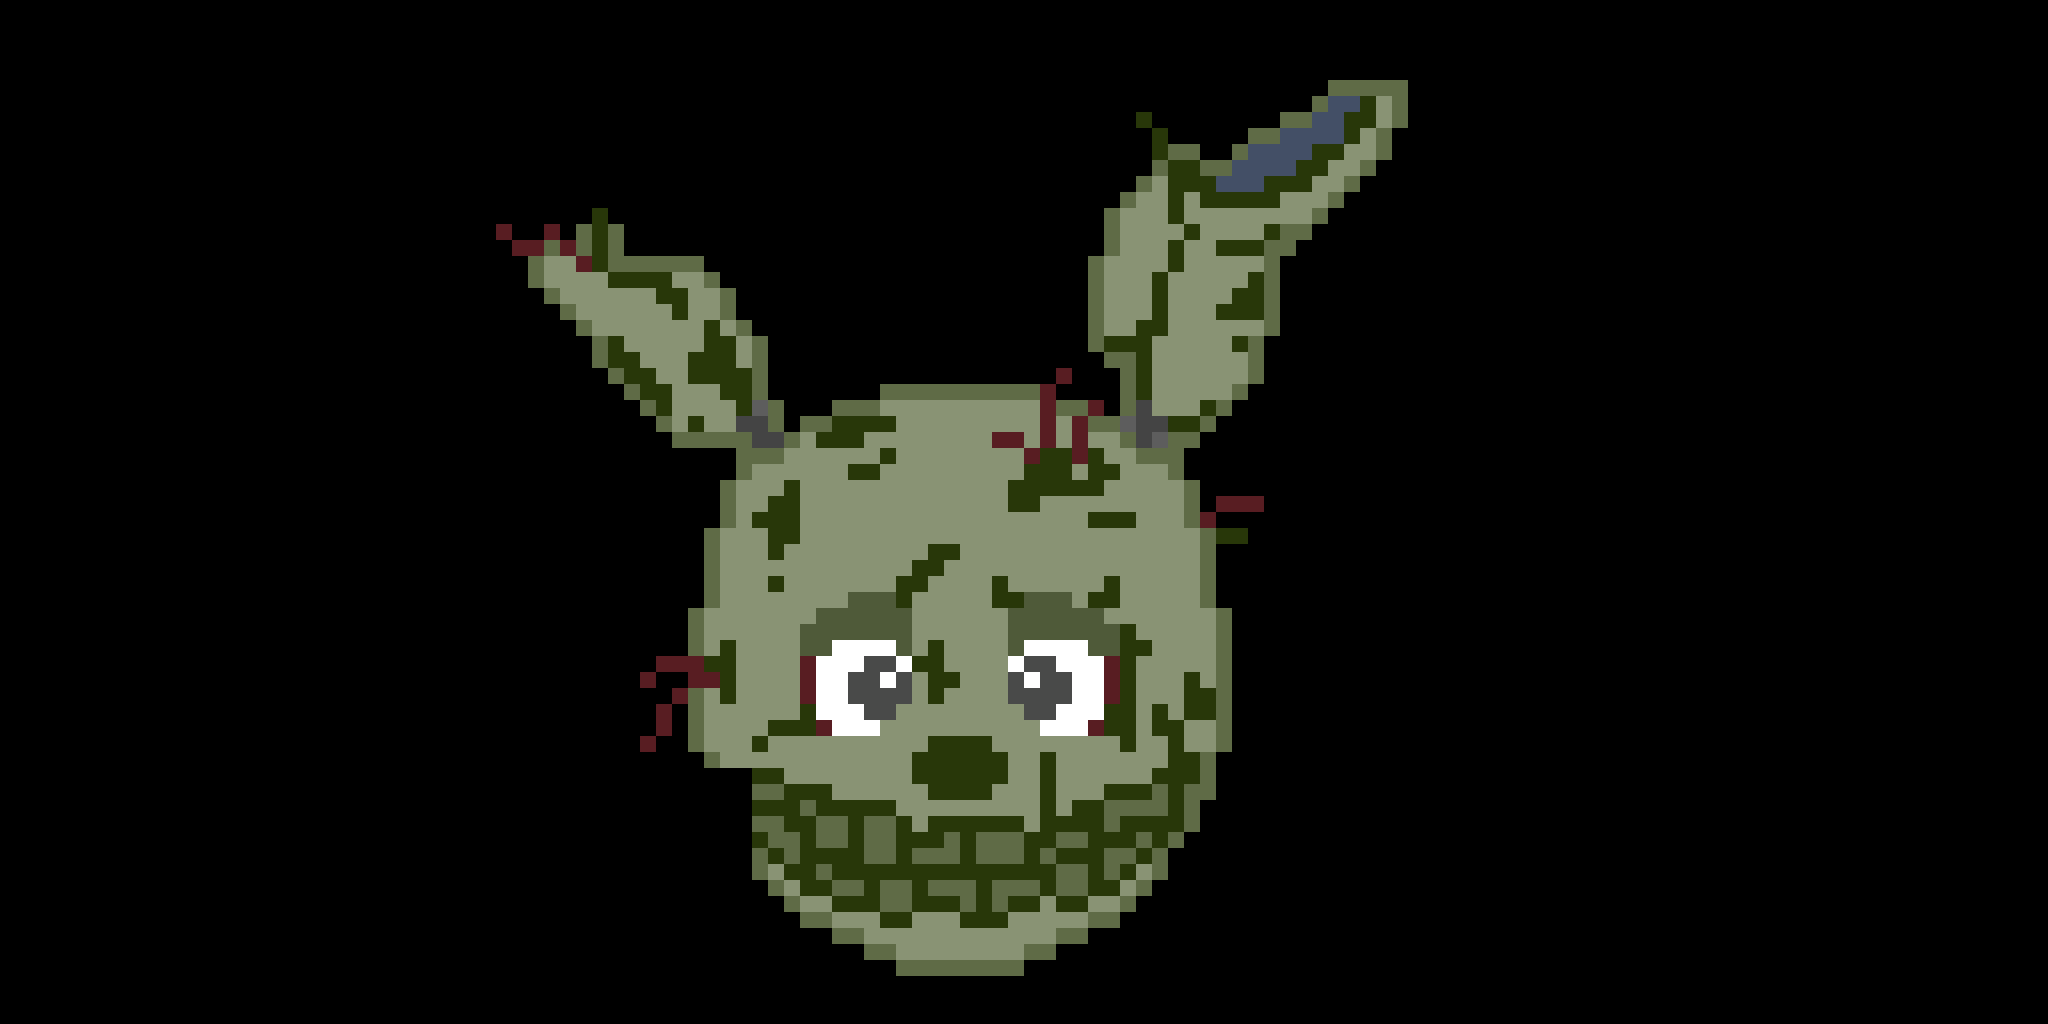 remake-of-springtrap-removed-the-fire-because-it-made-it-look-weird